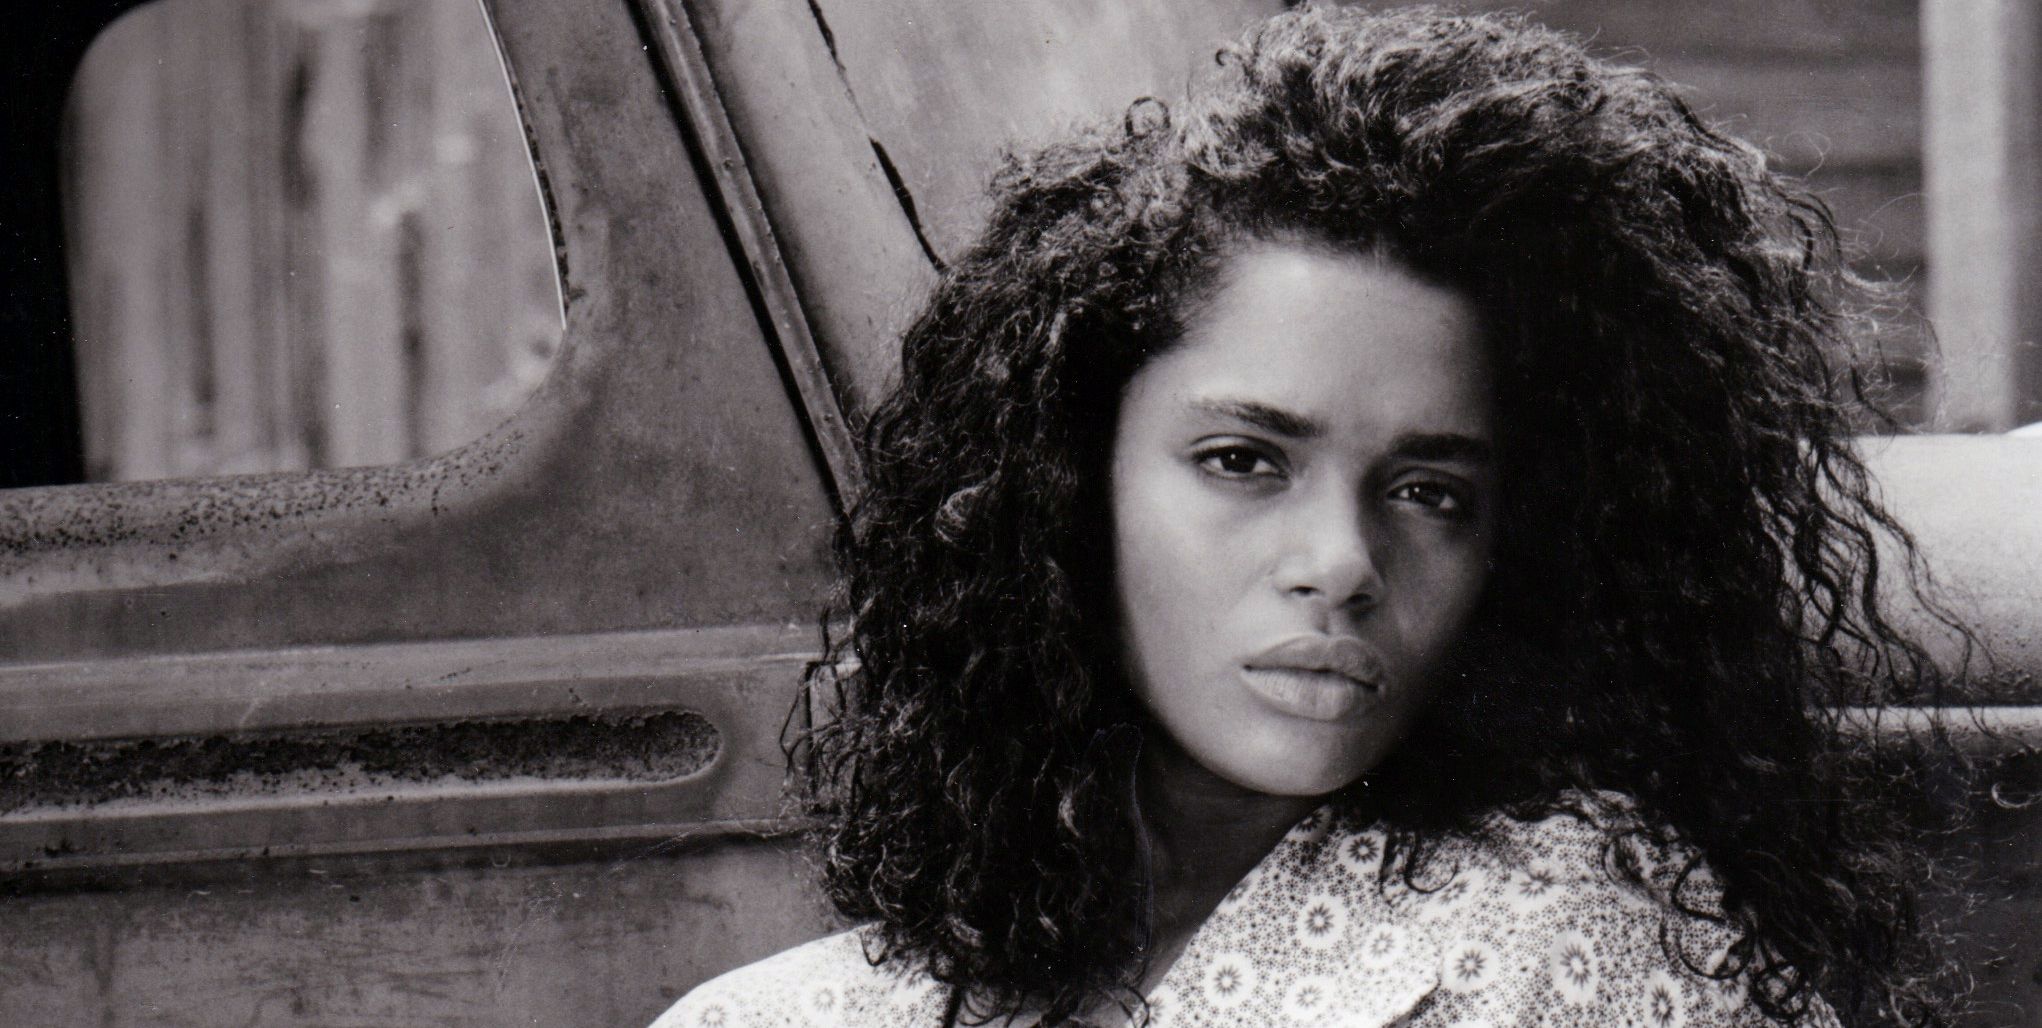 new york, ny   circa 1987 lisa bonet plays epiphany proudfoot , a young woman involved with the occult who harry angel encounters in his search for a mysterious big band singer photo by imagesgetty images